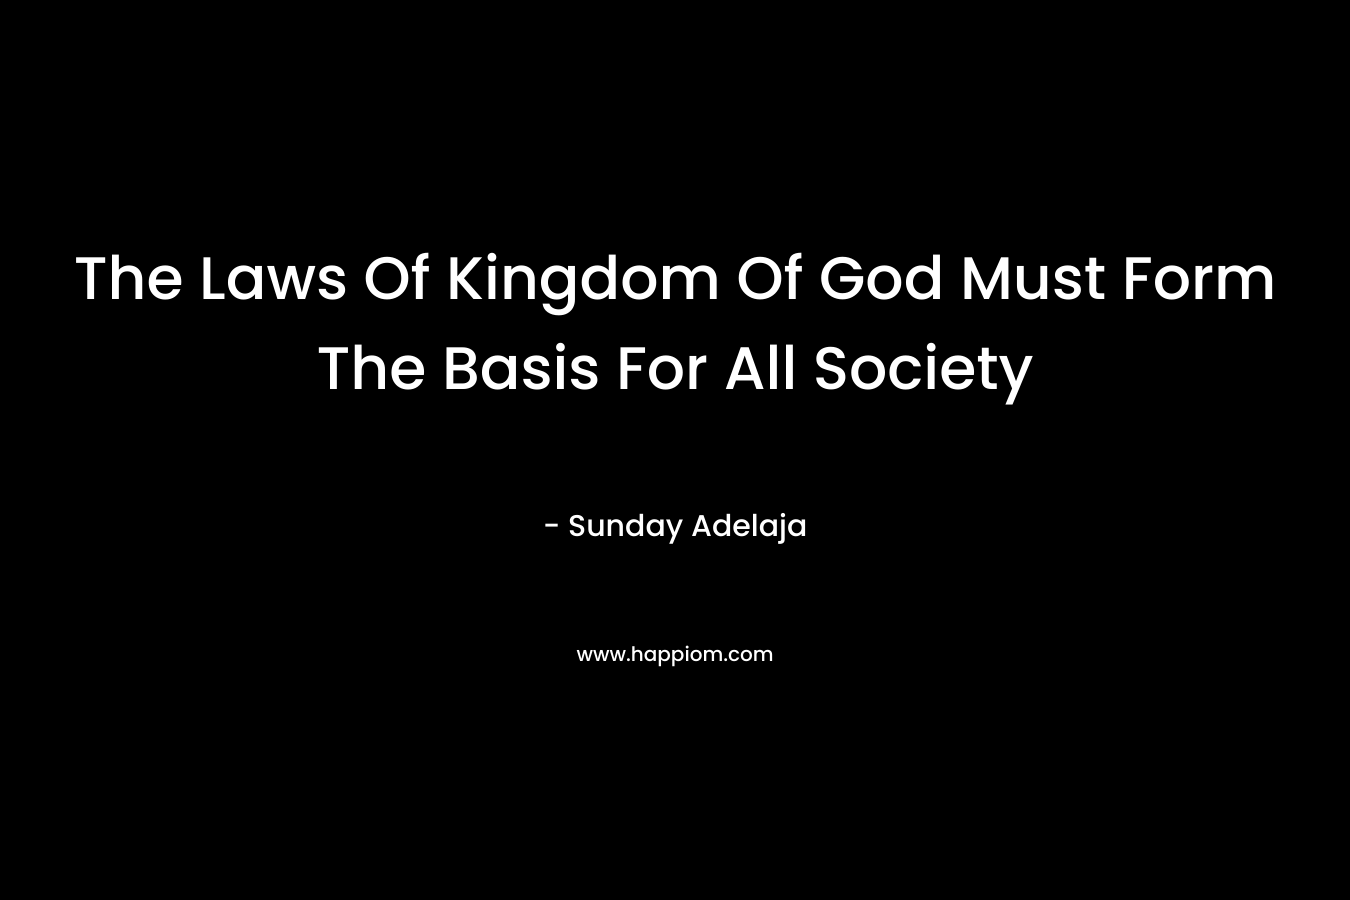 The Laws Of Kingdom Of God Must Form The Basis For All Society